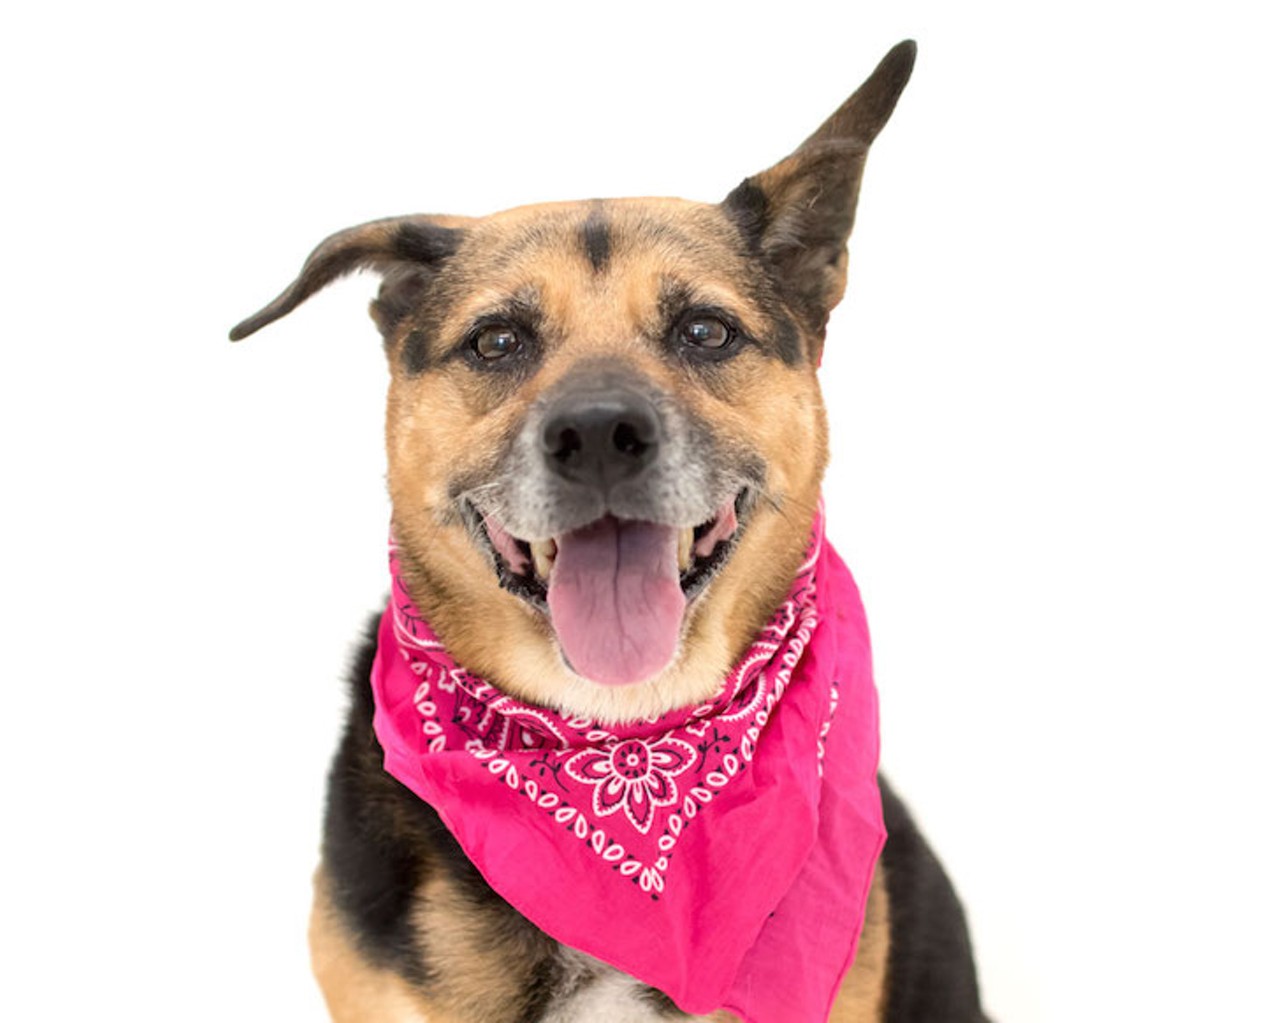 22 adoptable dogs looking for a new companion